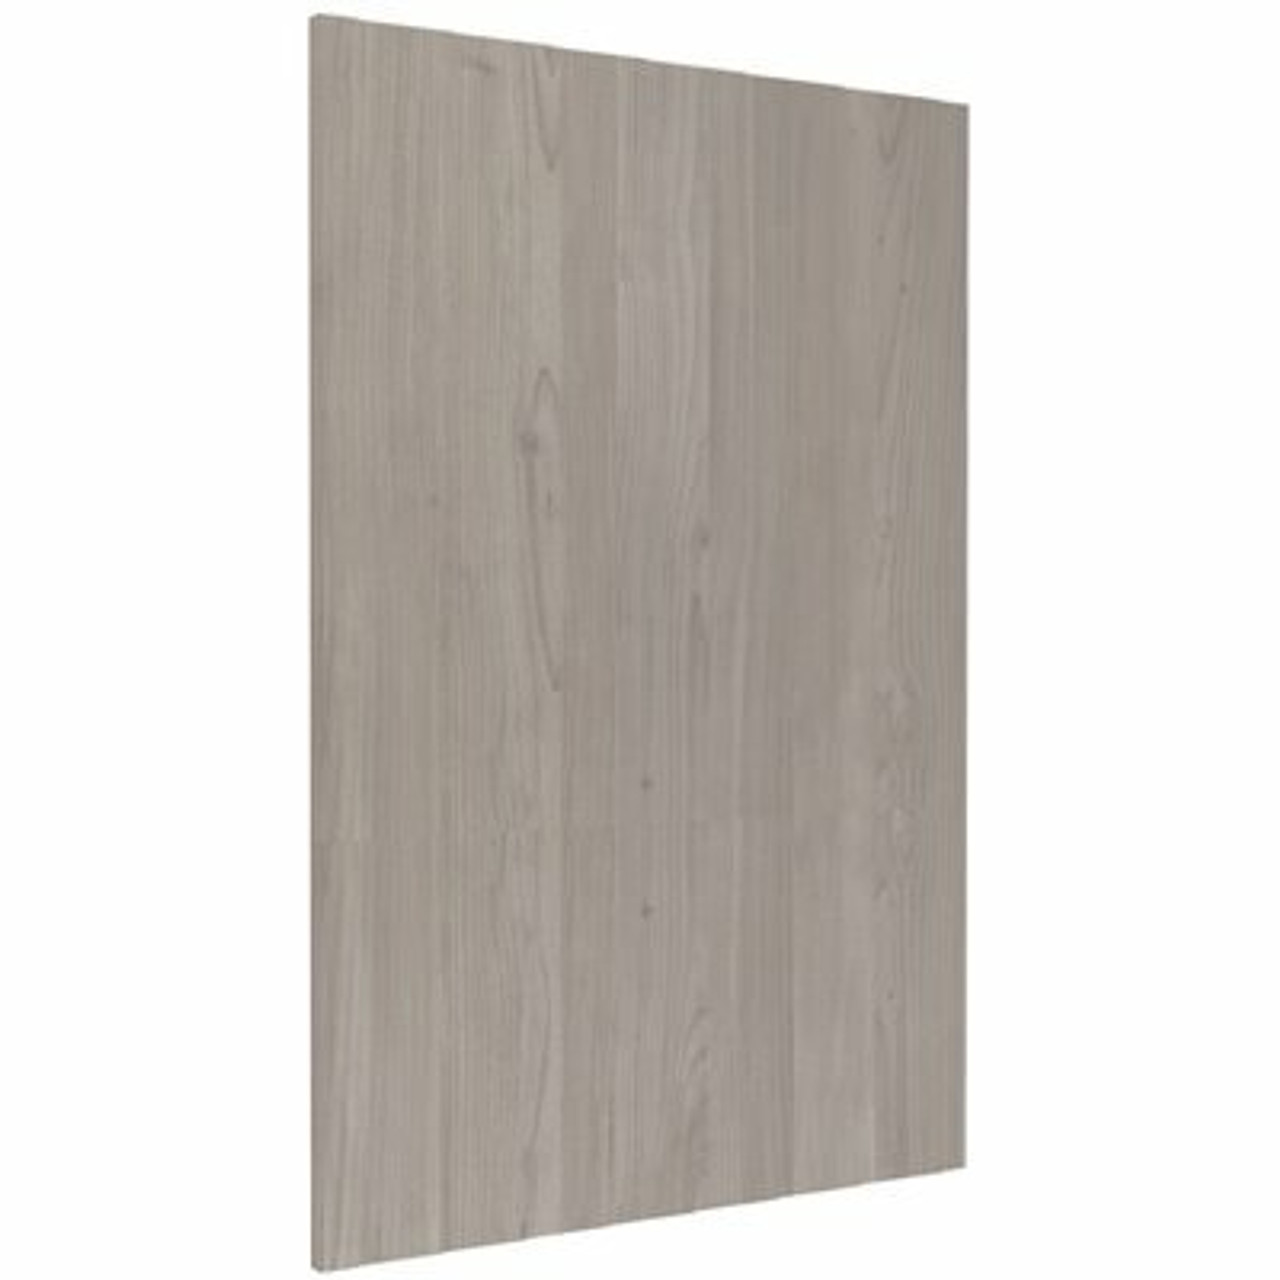 Cambridge Standard 36 In. X 24 In. X 1 In. Decorative End Panel For Base Cabinet In Grey Nordic